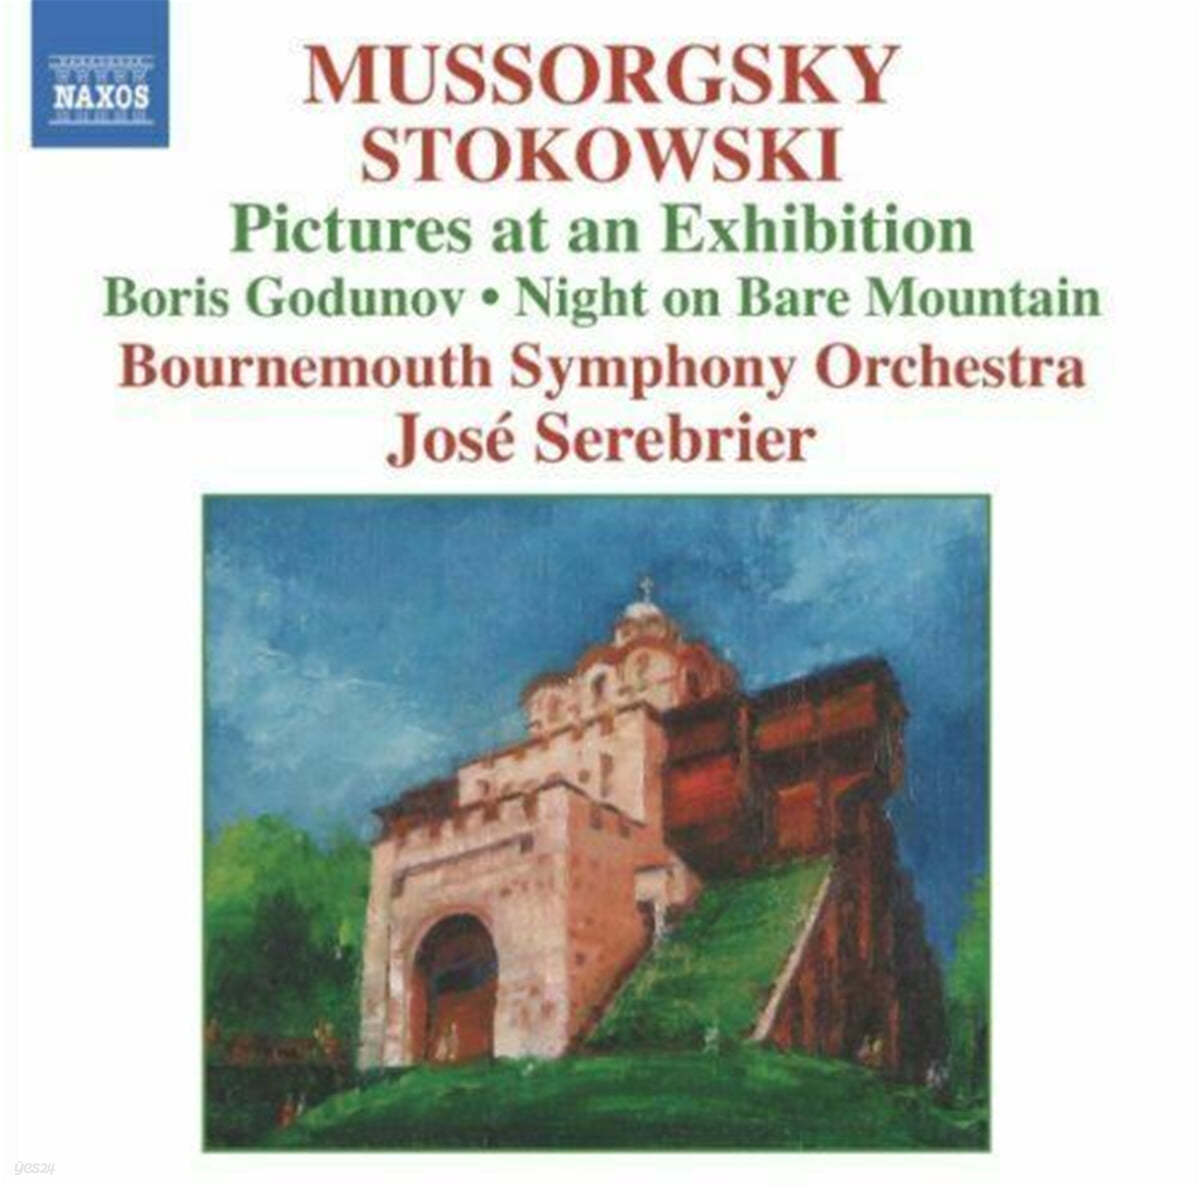 Jose Serebrier 무소르그스키: 전람회의 그림 (Mussorgsky : Pictures At An Exhibition) 